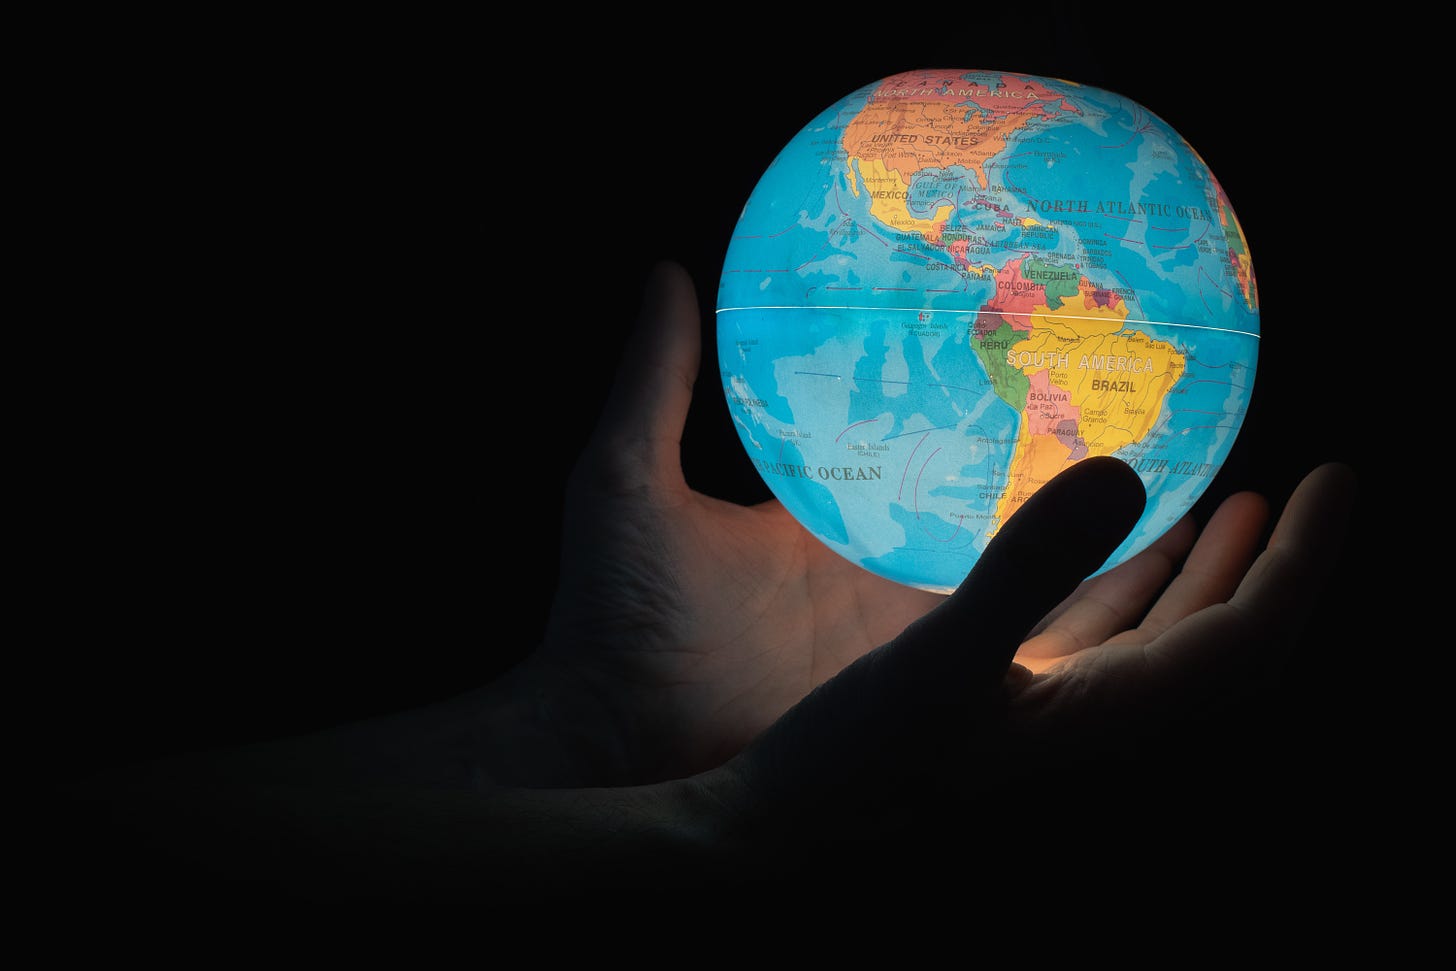 A glowing globe, illuminating two hands holding the globe against a black background. The globe is the kind you'd find in a class room, showing North and South America, each country a different color